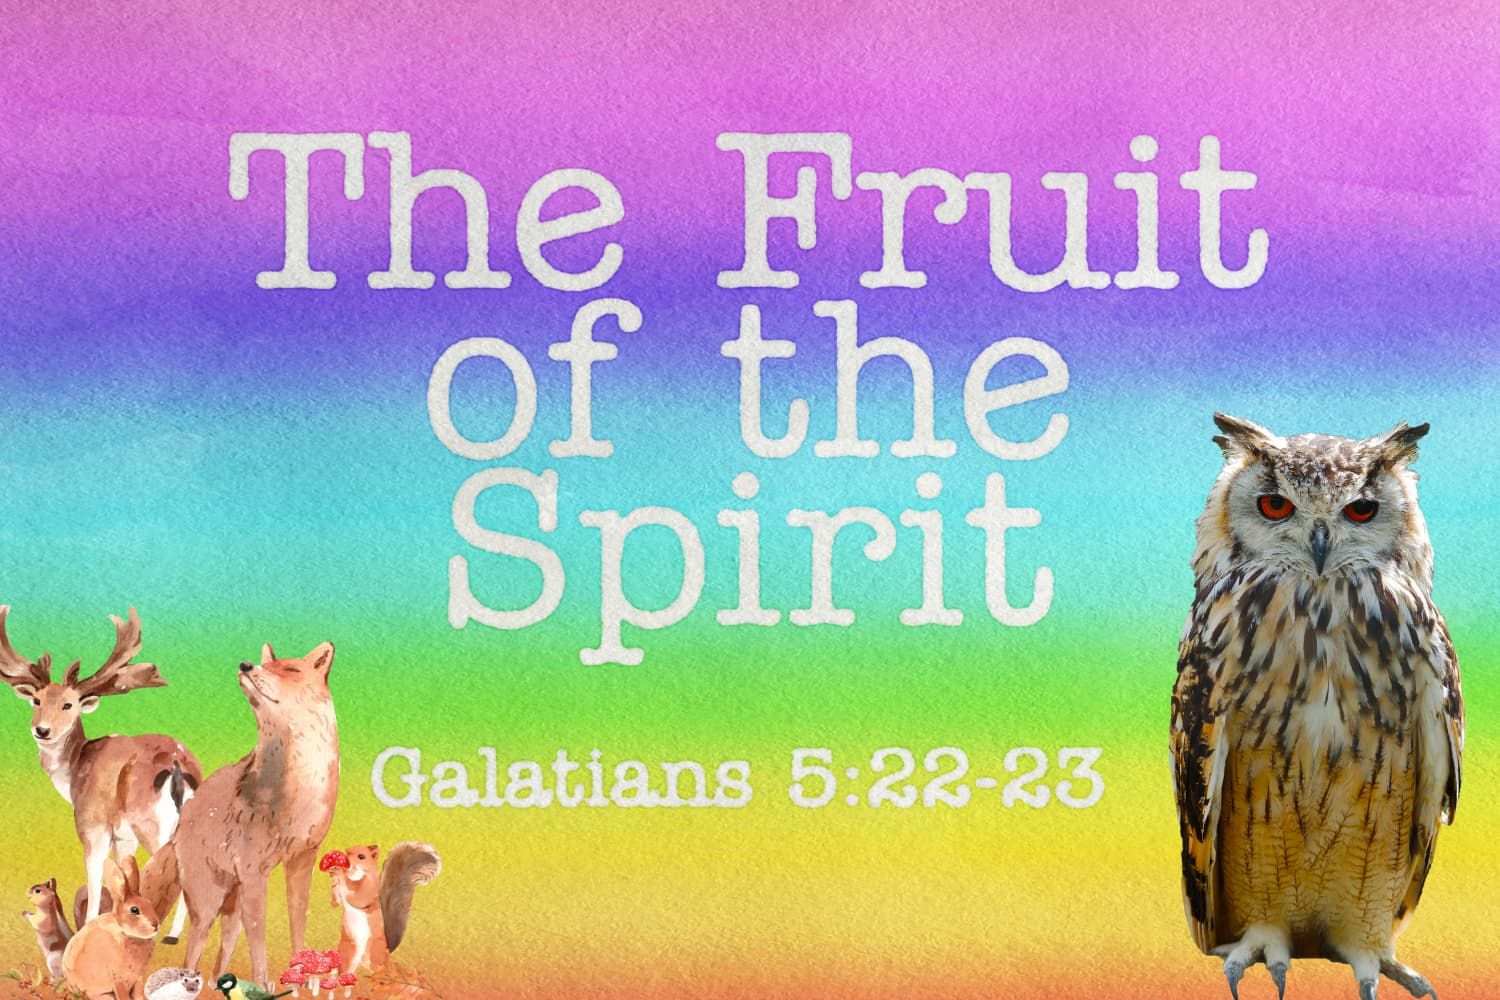 Parable%20-%20Wise%20owl%20and%20fruit%20of%20the%20spirit-d9417540 Holy Spirit - Fruit of the Spirit